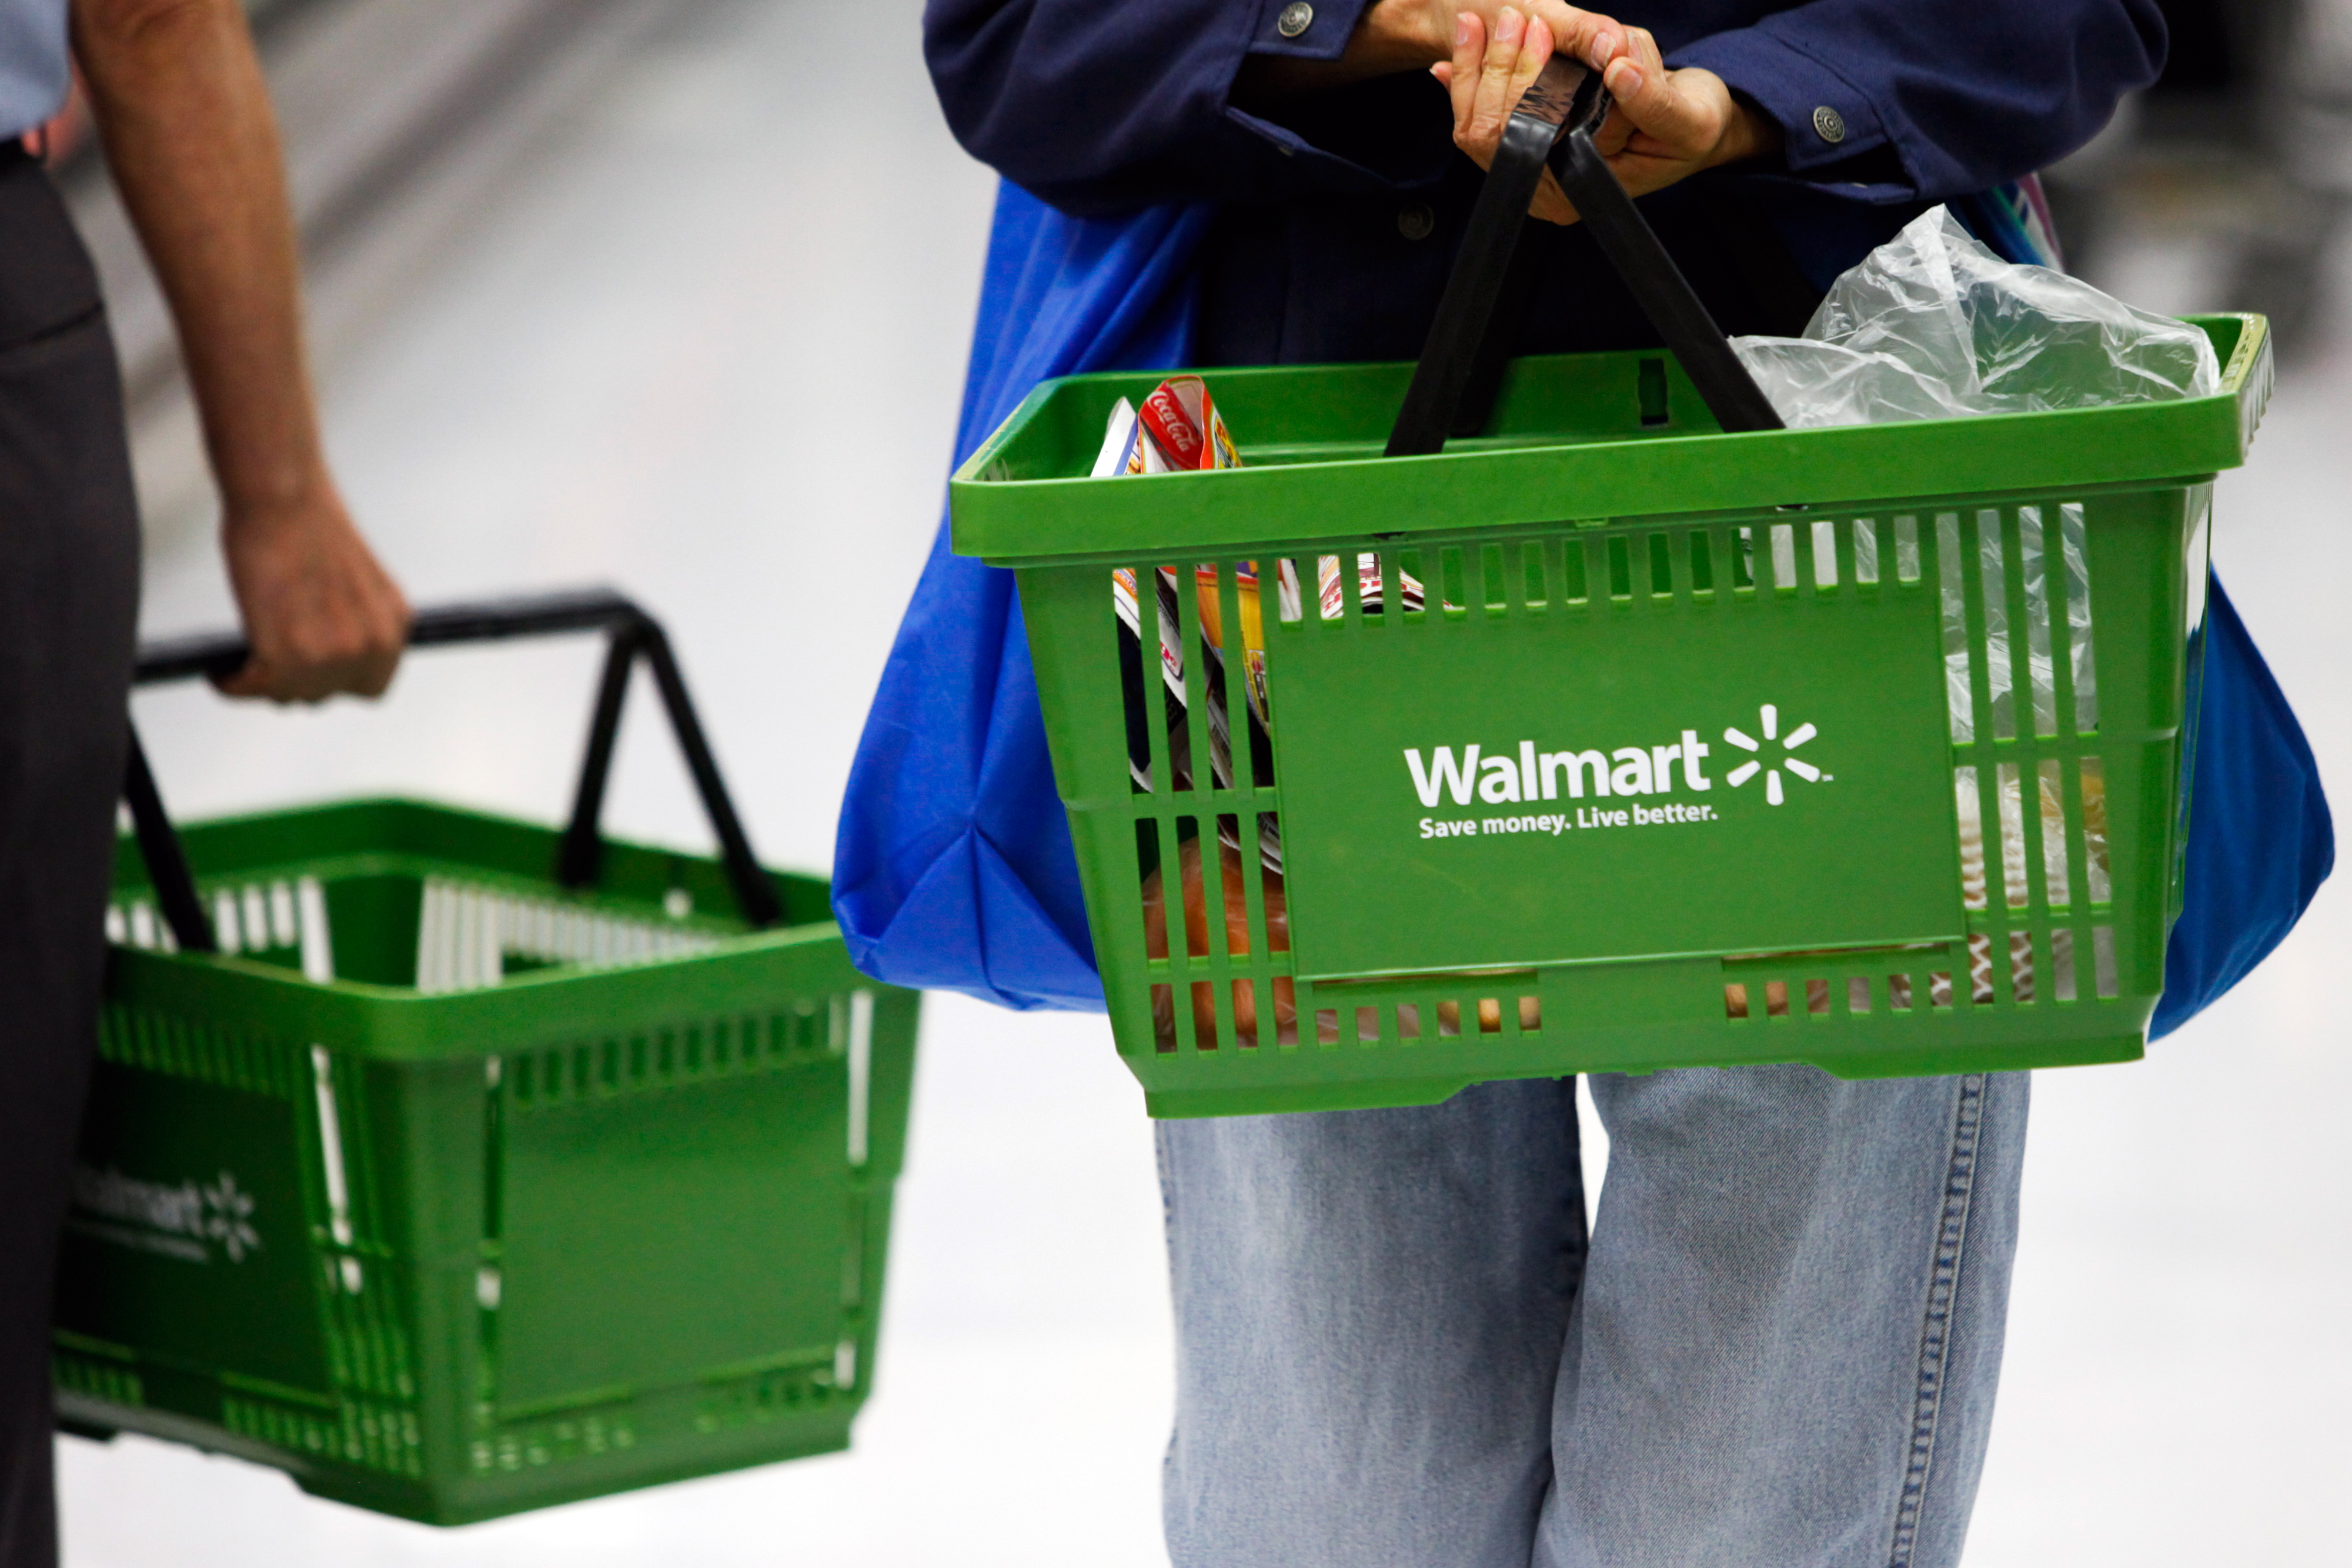 You Can Now Buy Health Insurance at Walmart. Should You?